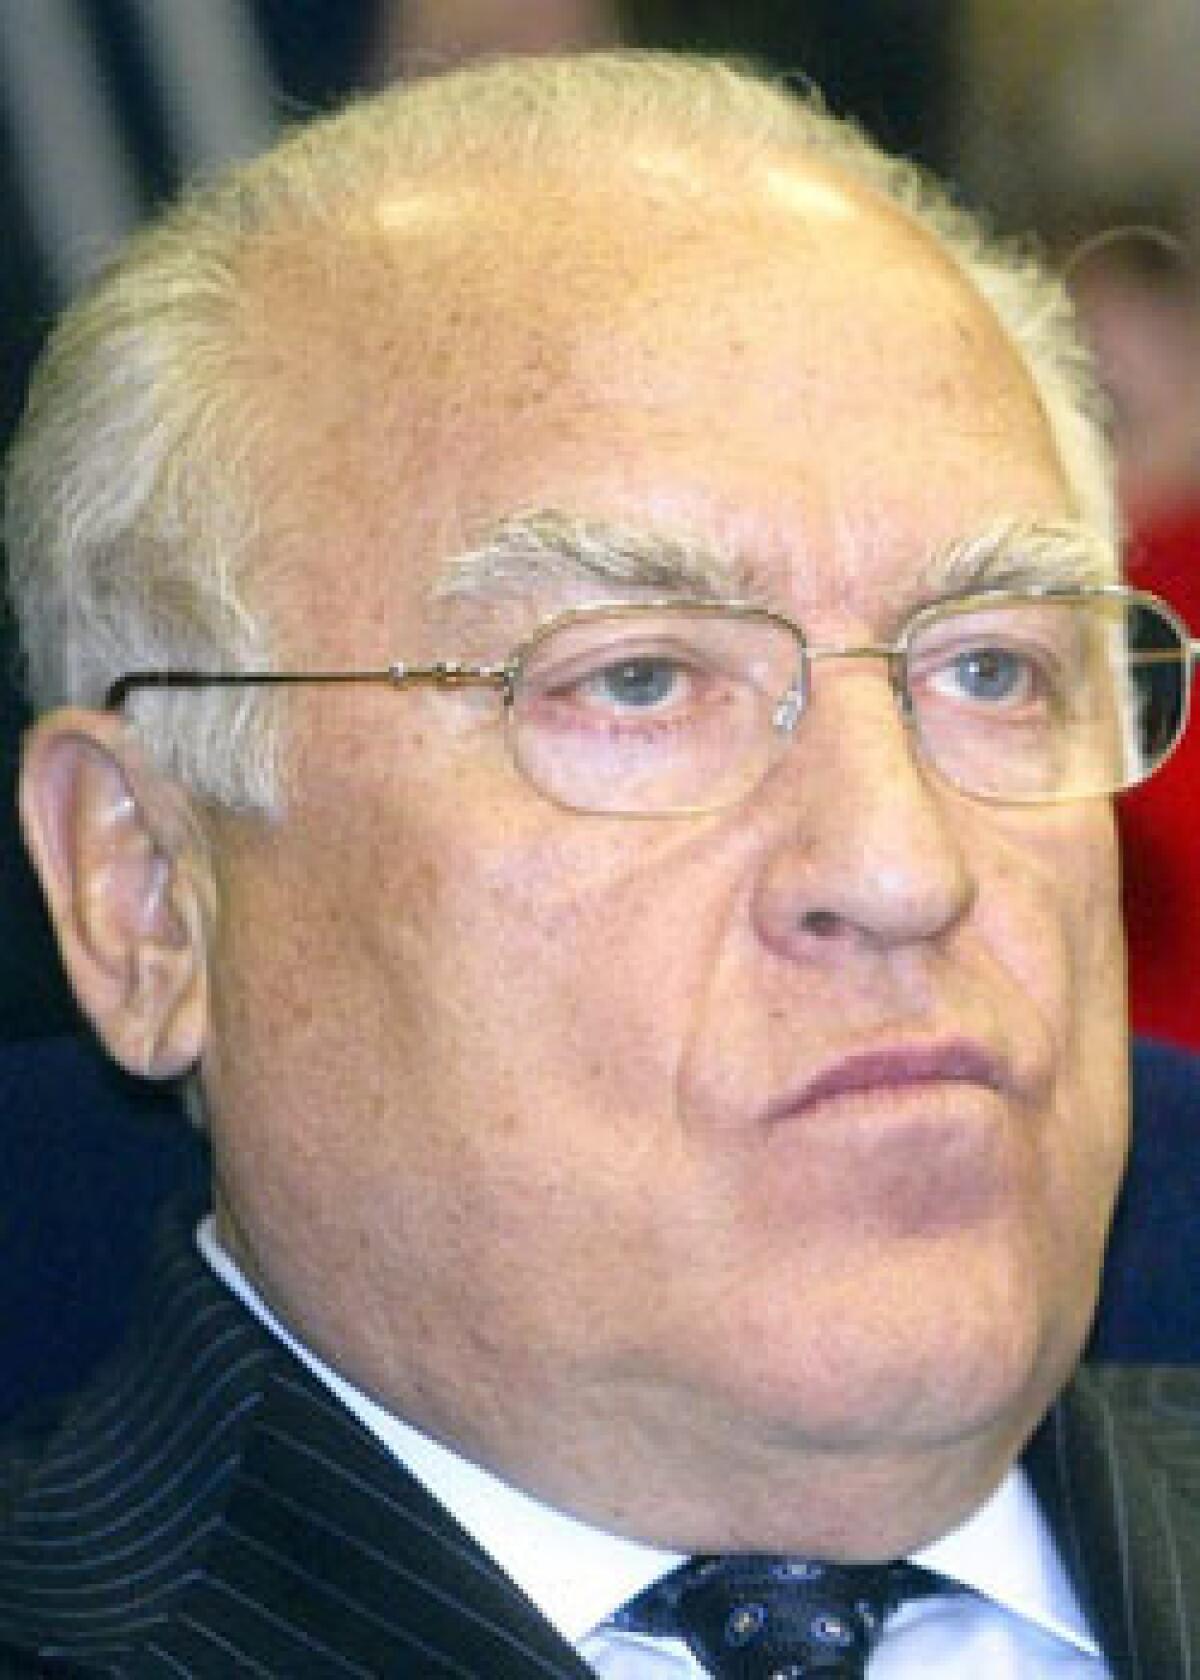 Viktor Chernomyrdin, seen in 2006, was appointed Russia's prime minister in 1992 by then-President Boris Yeltsin and surprised the young liberal economists leading the country's transformation by pushing ahead with market reforms.